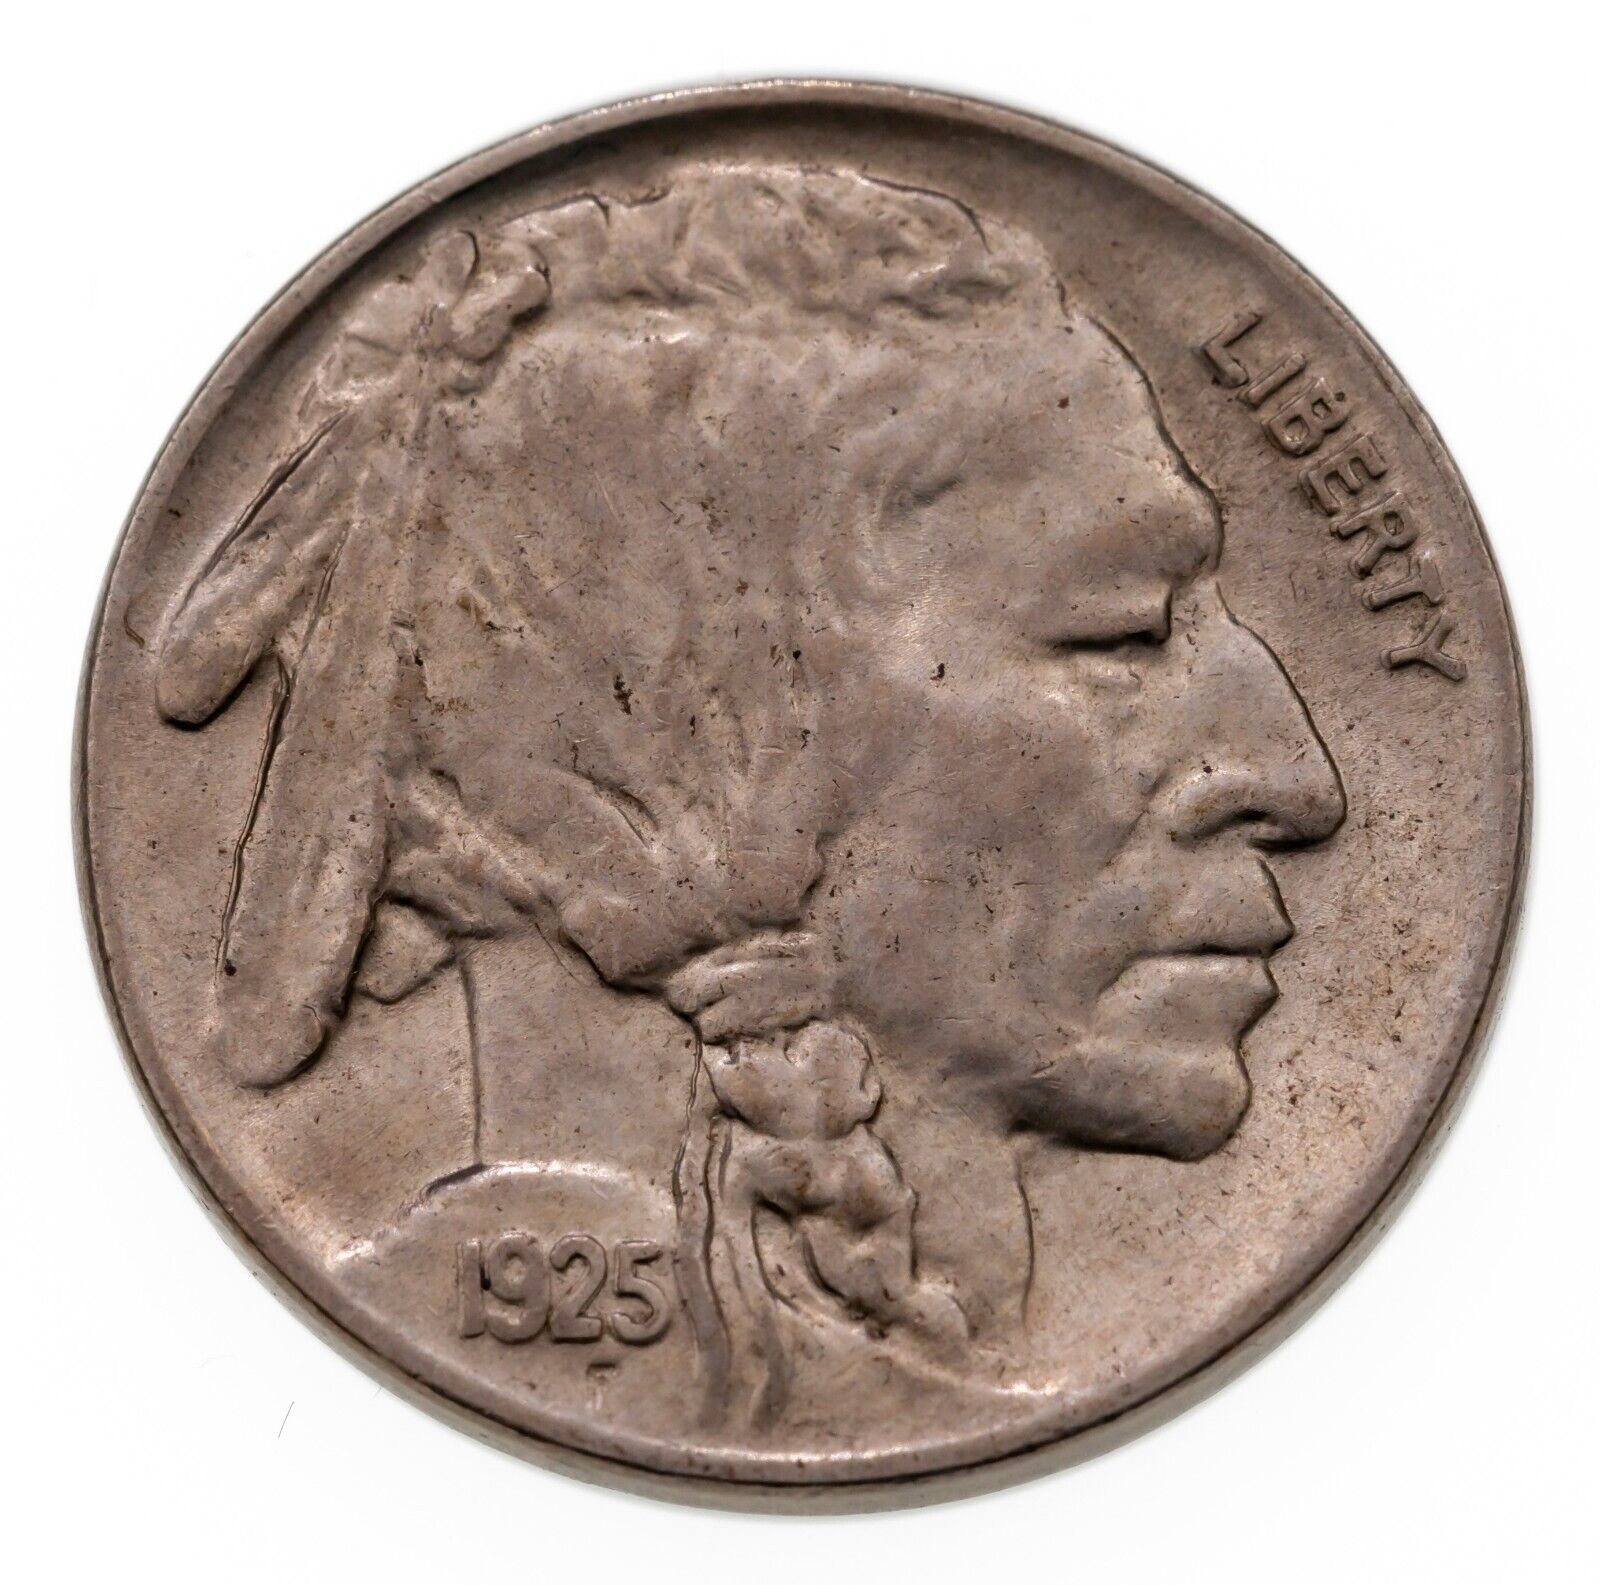 Primary image for 1925 5C Buffalo Nickel in Choice BU Condition, Excellent Eye Appeal & Luster